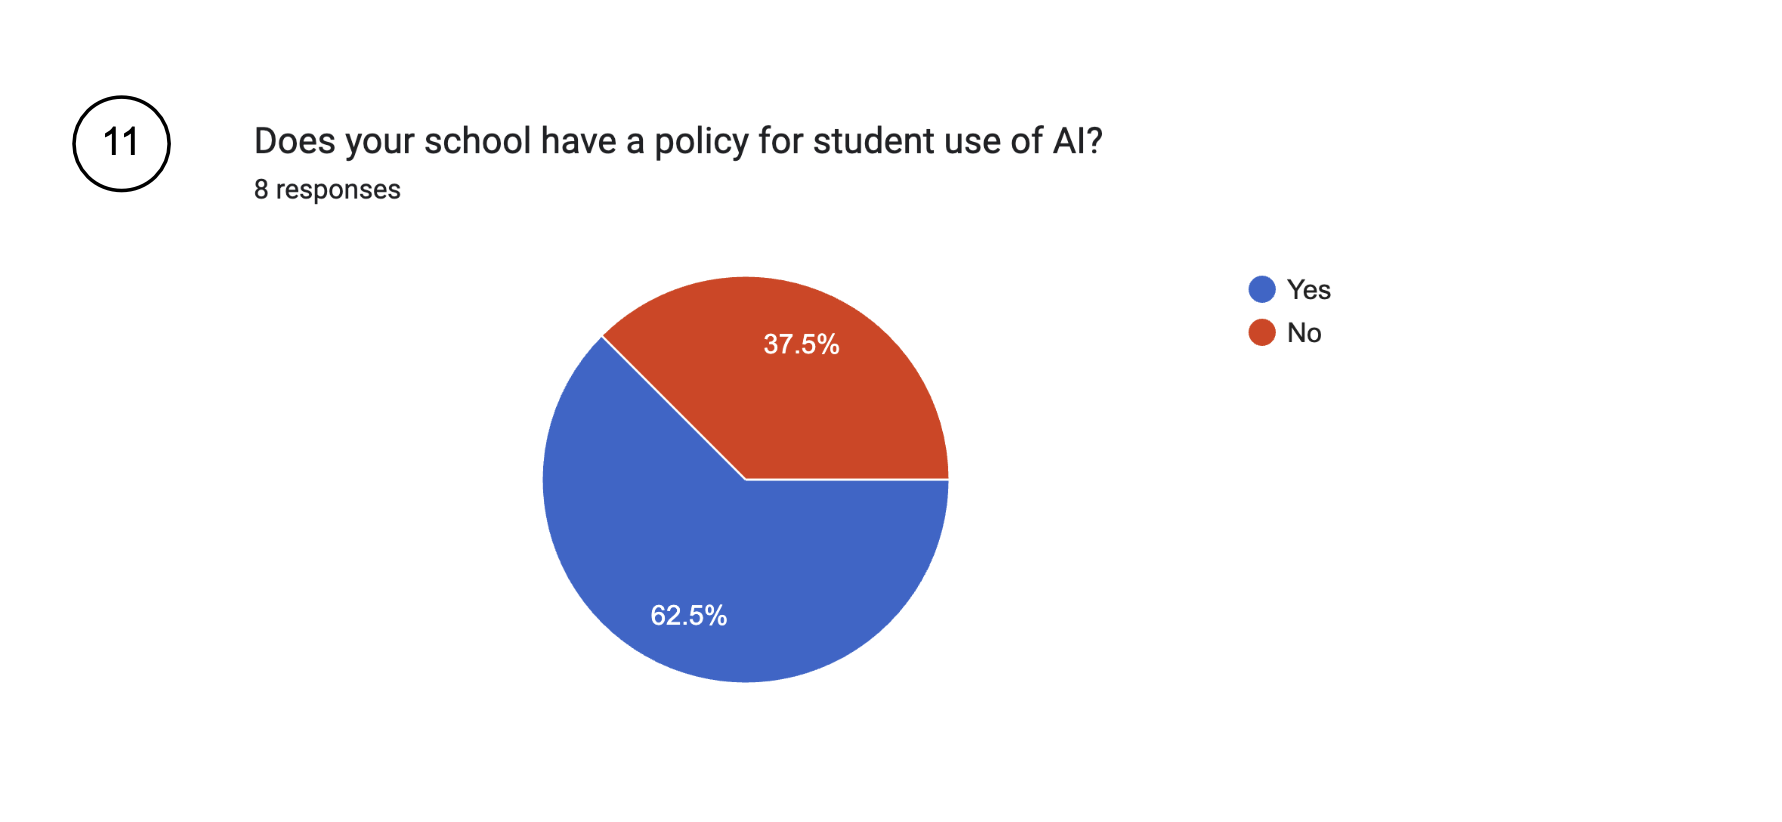 Does your school have a policy for student use of AI?